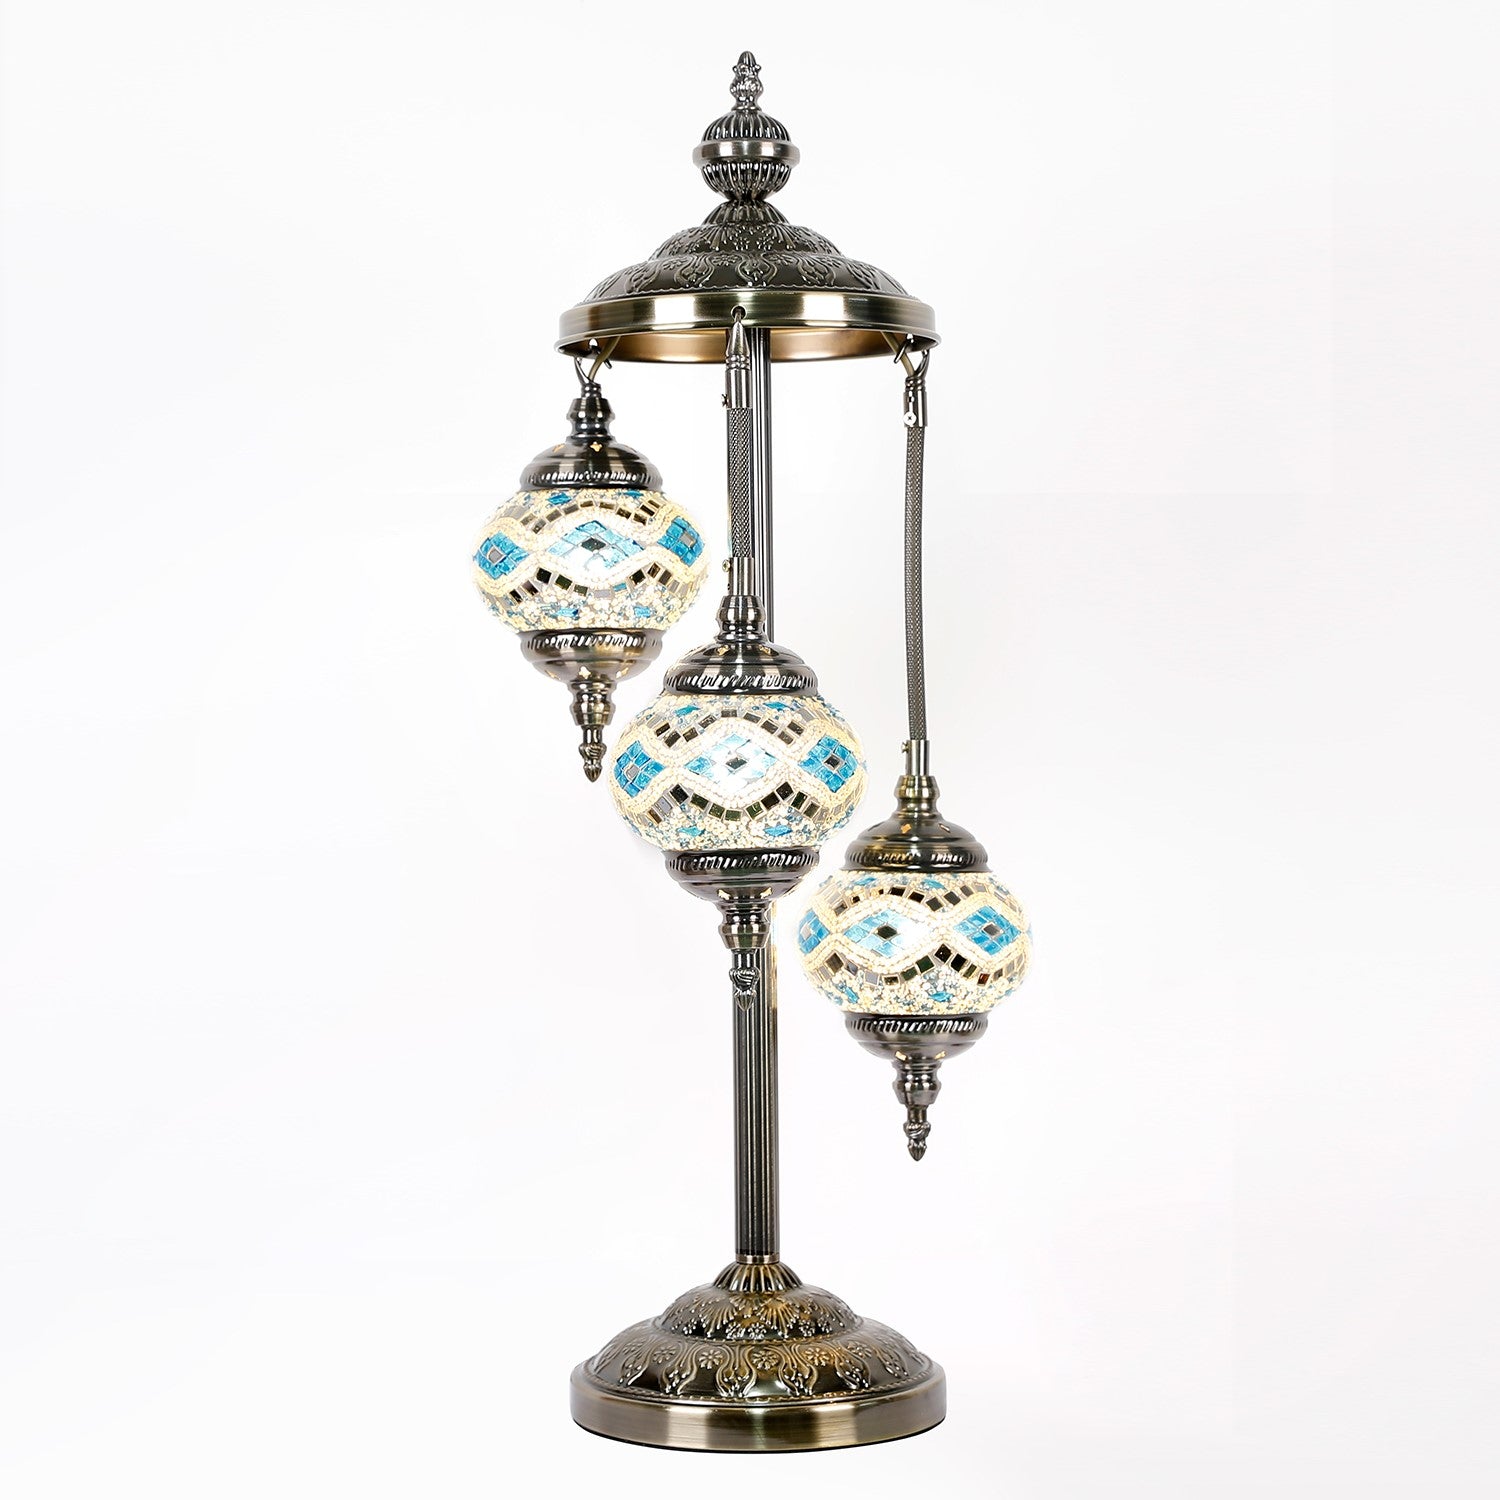 Sky Blue and Silver Three Tier Luxury Turkish Mosaic Lamp - Rivendell Shop